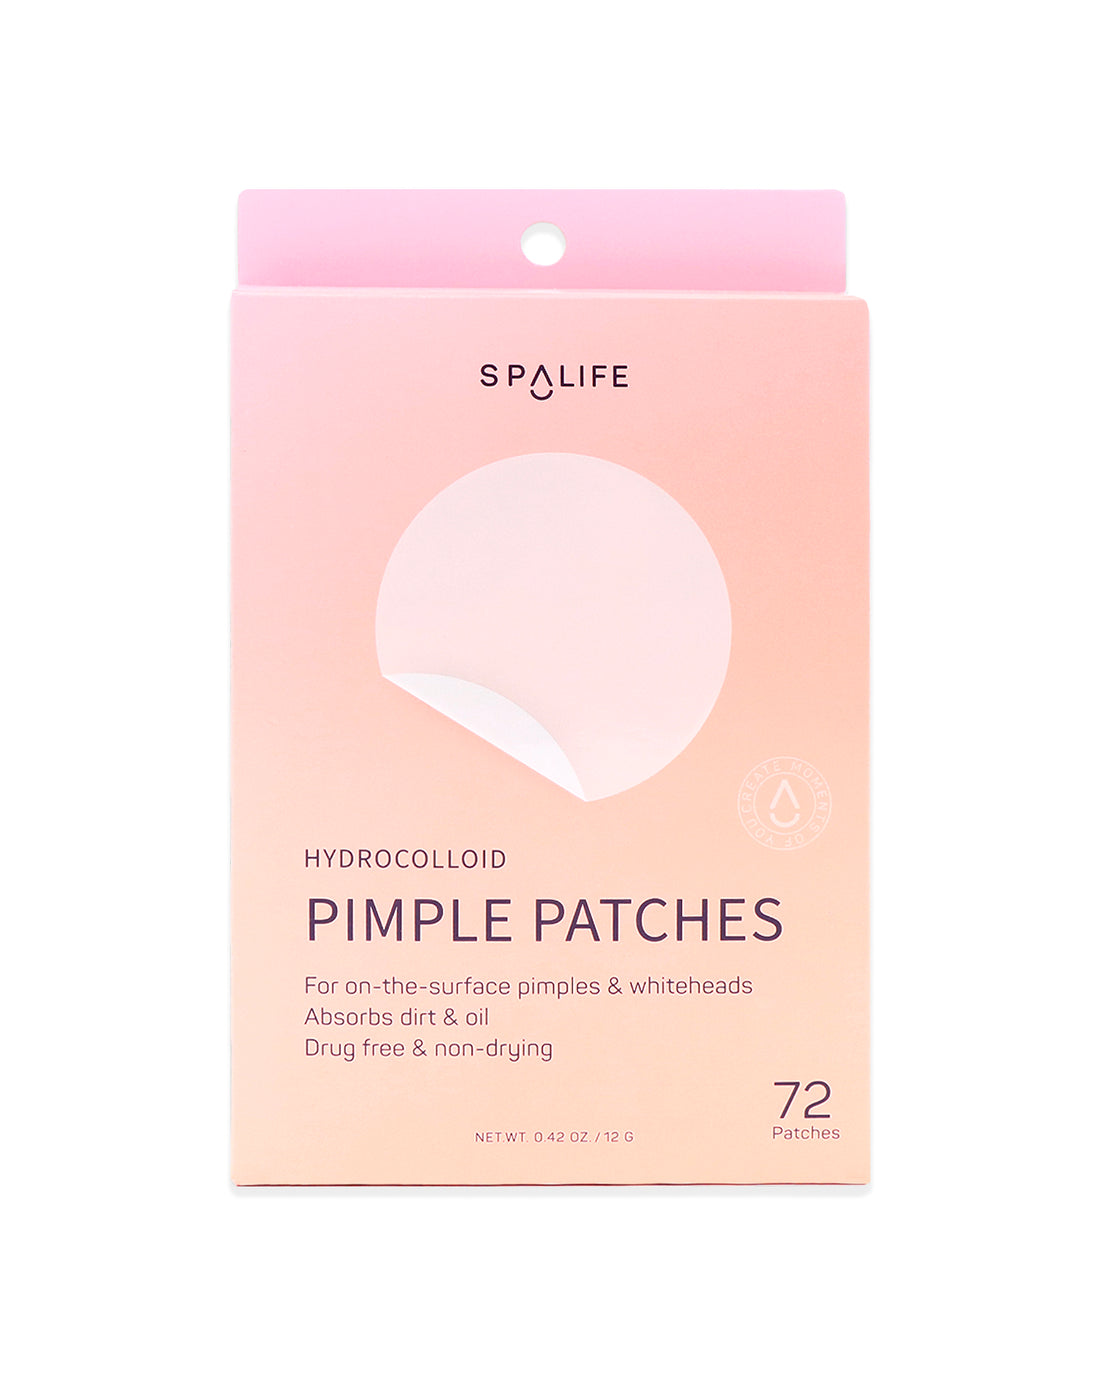 Hydrocolloid_pimple_patches_pa-724